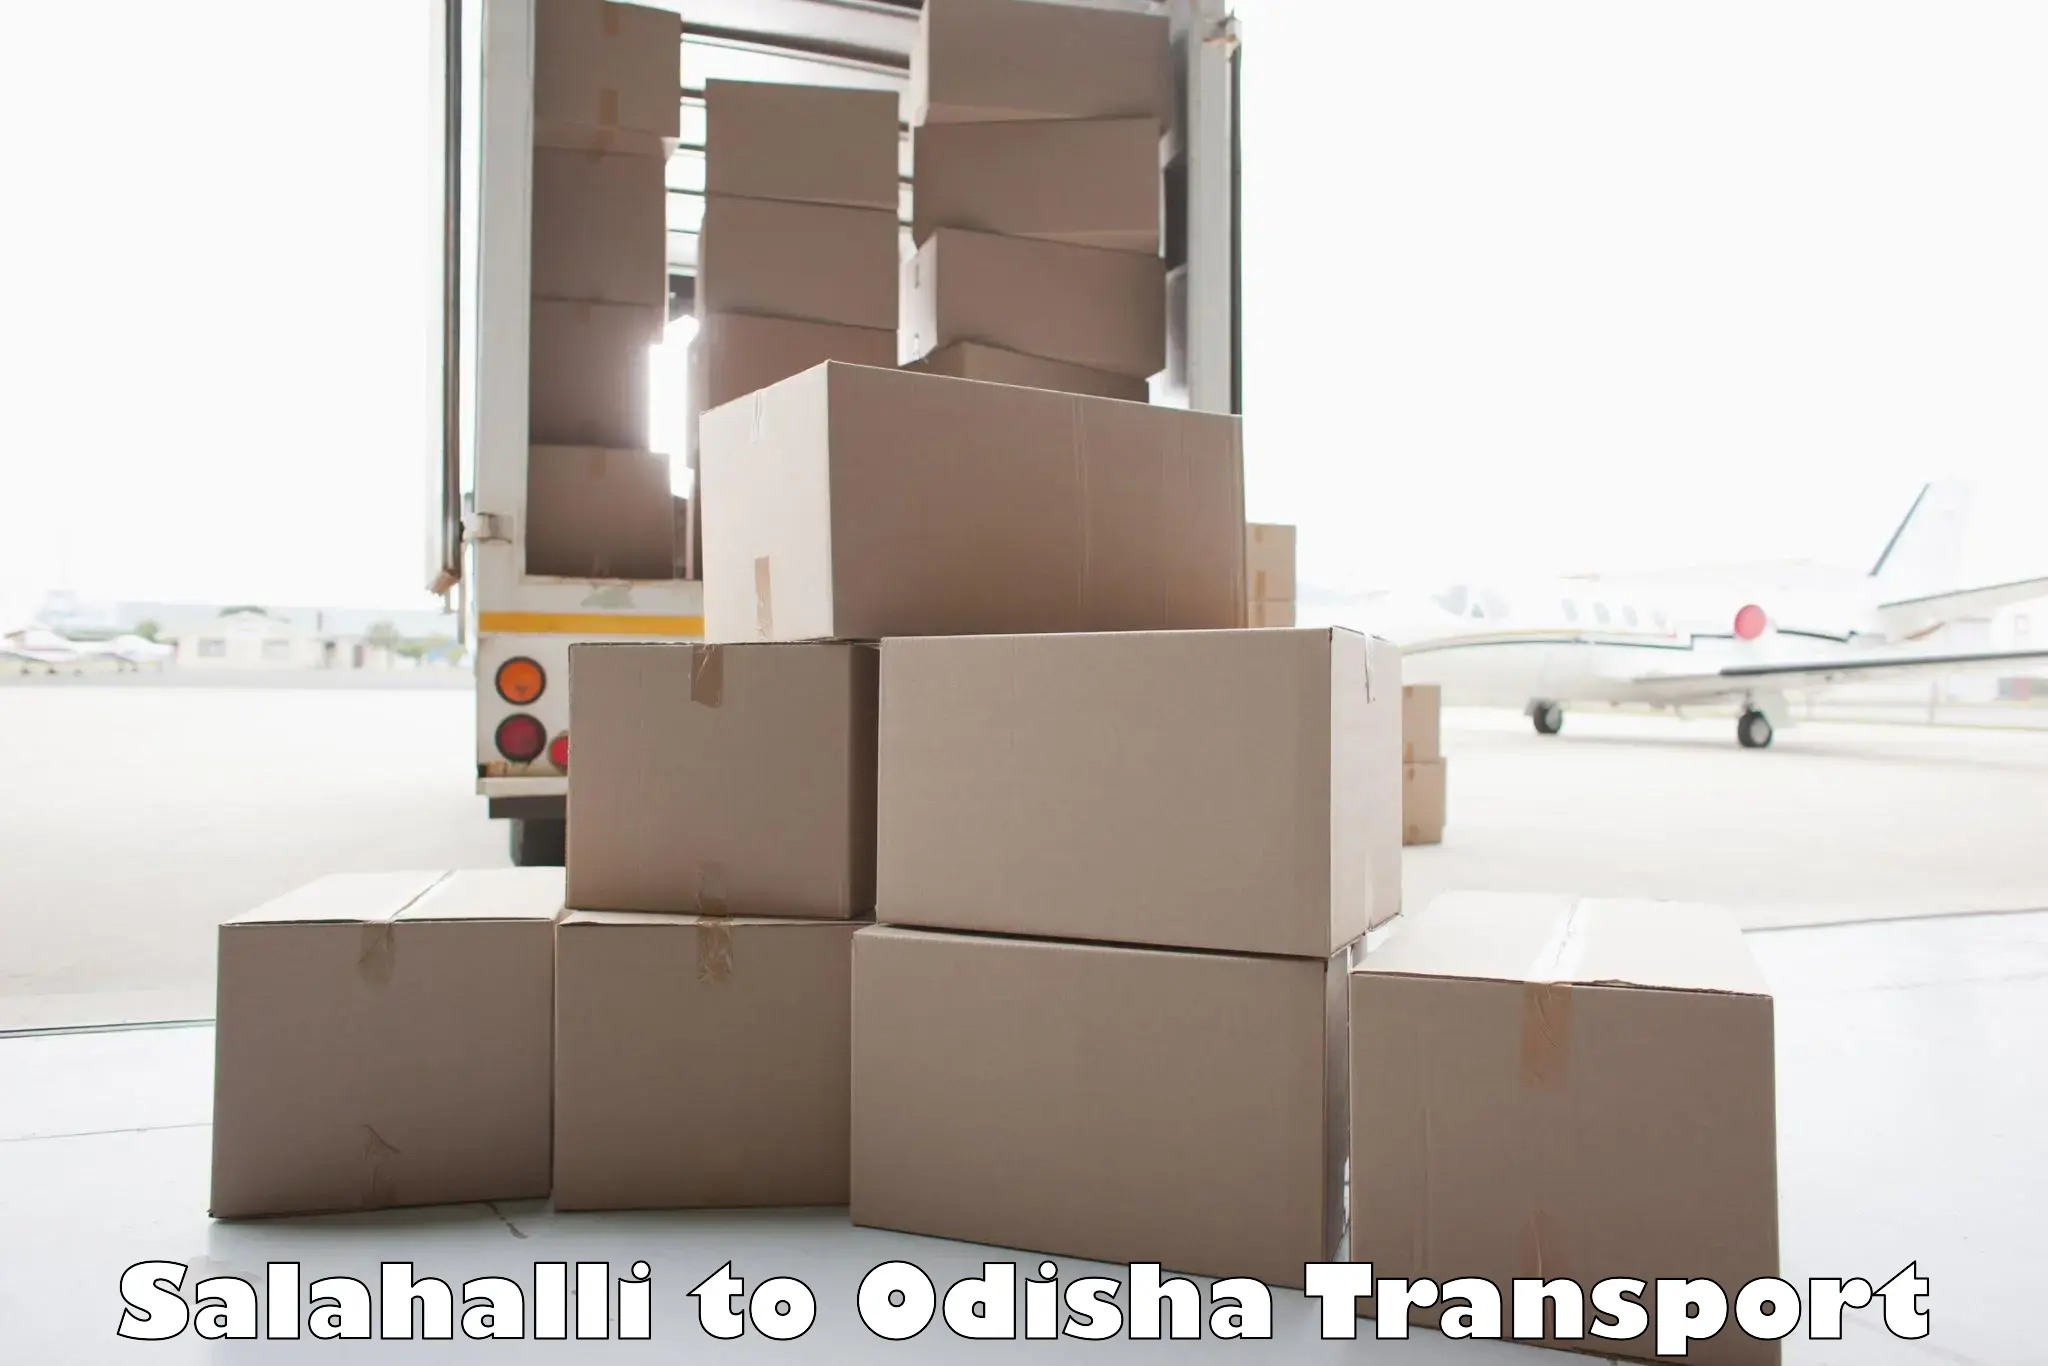 Transportation services in Salahalli to Cuttack